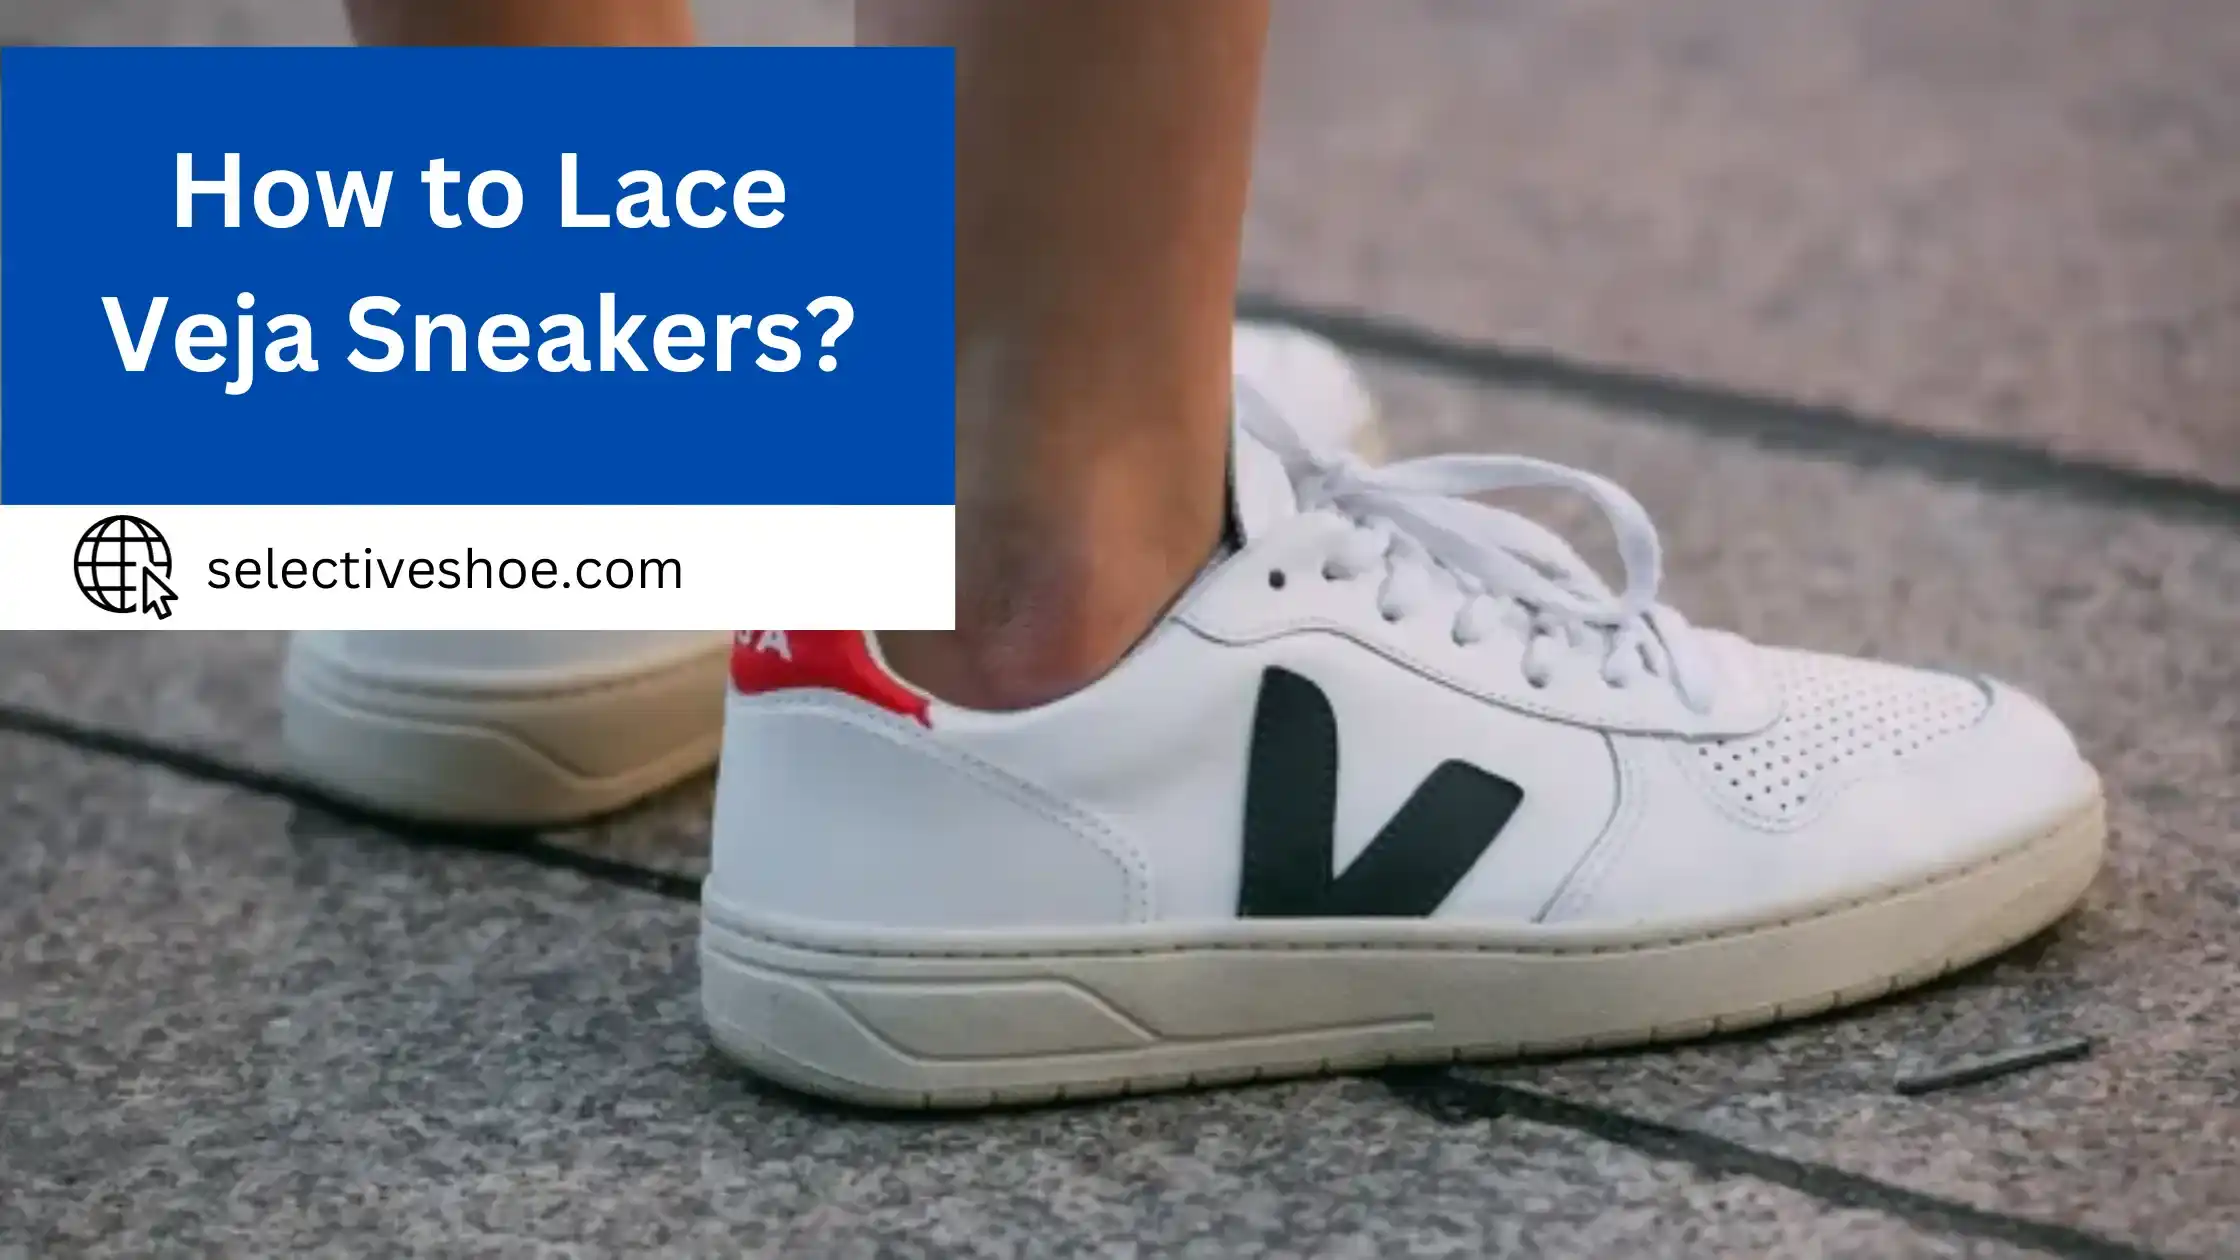 How to Lace Veja Sneakers? (An In-Depth Guide)